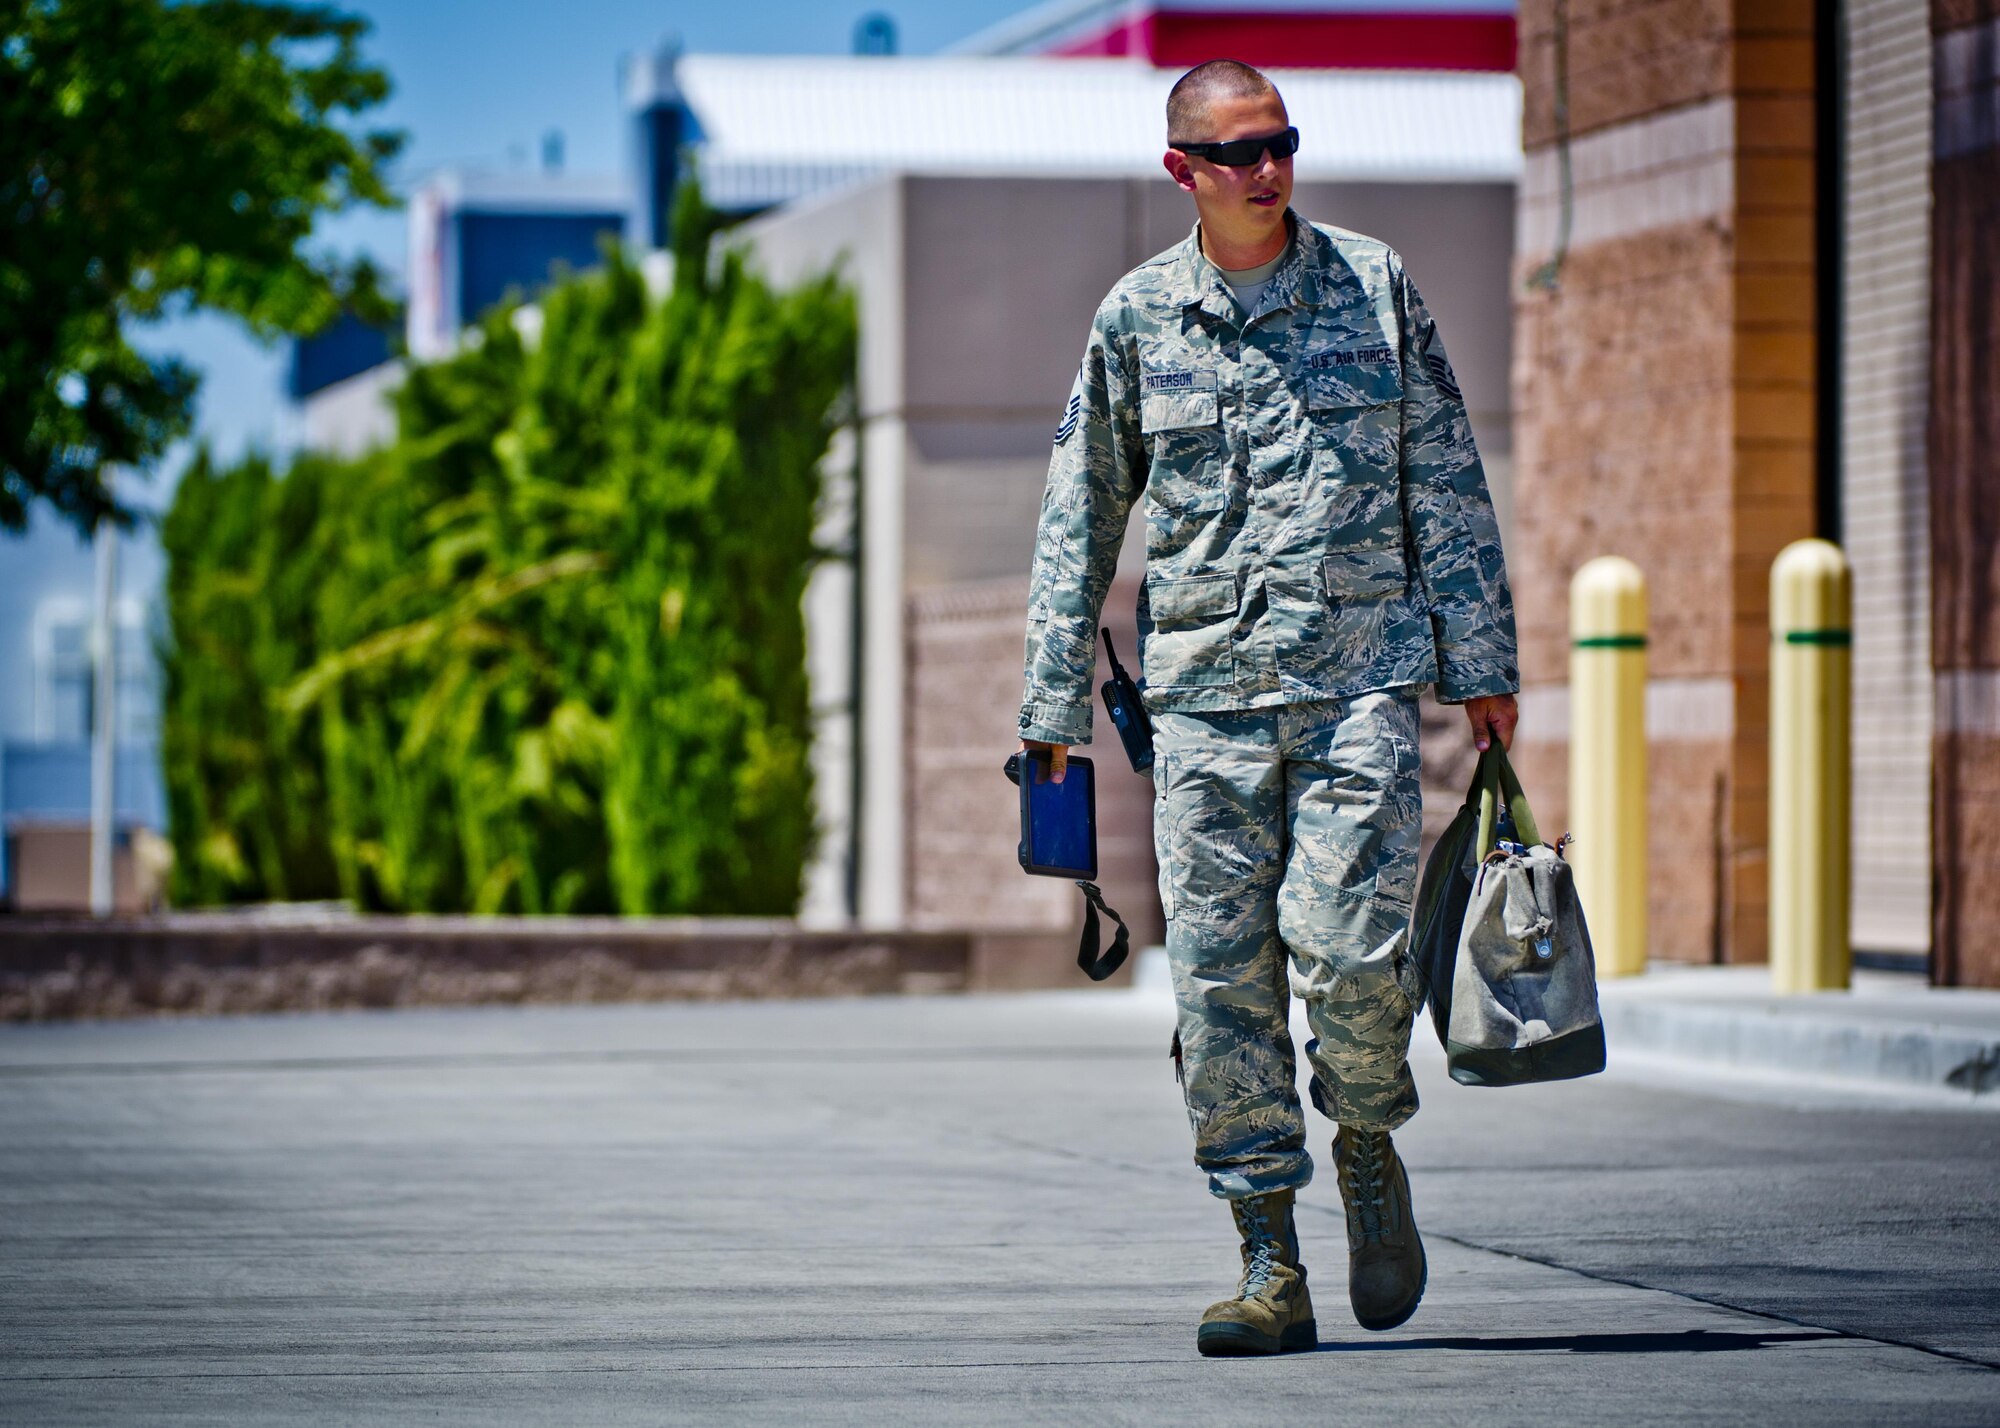 Master Sgt. Michael Paterson, 926th Aircraft Maintenance Squadron flightline expeditor, walks out to the flightline during Red Flag 16-3, July 13, 2016 at Nellis Air Force Base, Nev. Red Flag is a realistic combat training exercise involving the air forces of the U.S. and its allies that maximizes the combat readiness and survivability of participants by providing a realistic training environment. (U.S. Air Force photo/Senior Airman Brett Clashman)